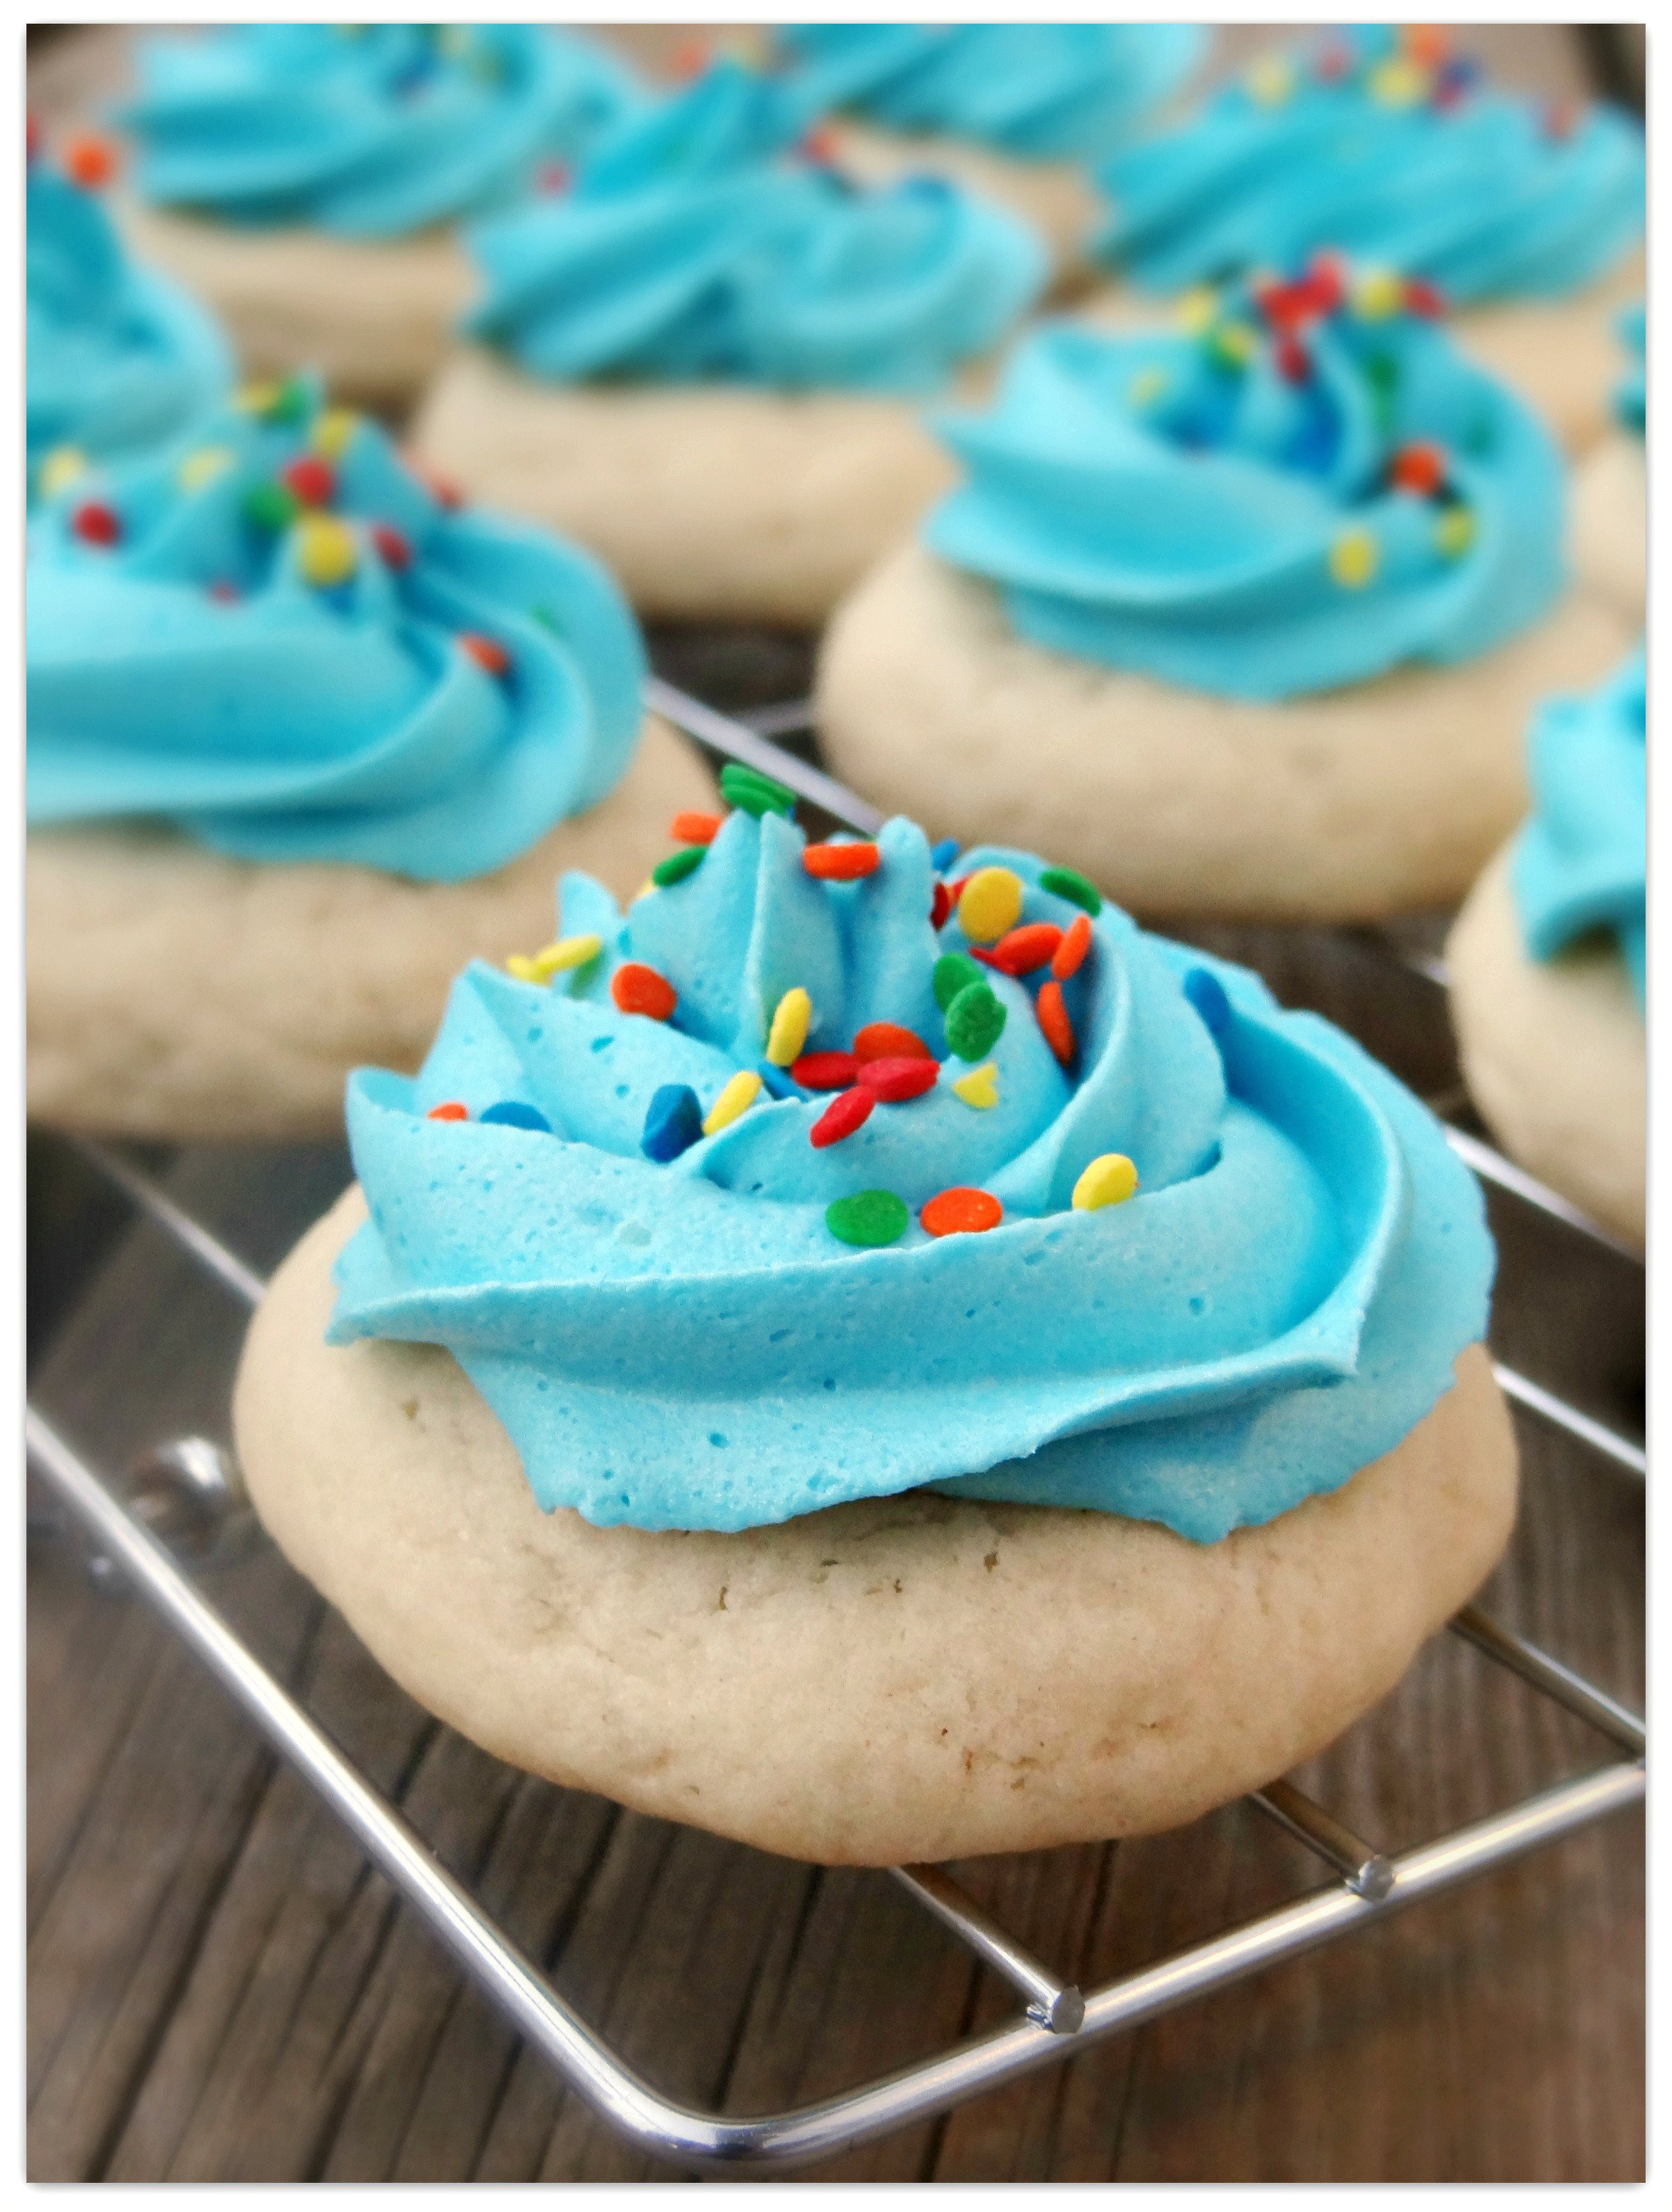 Frosted Sugar Cookies
 Soft Frosted Sugar Cookies